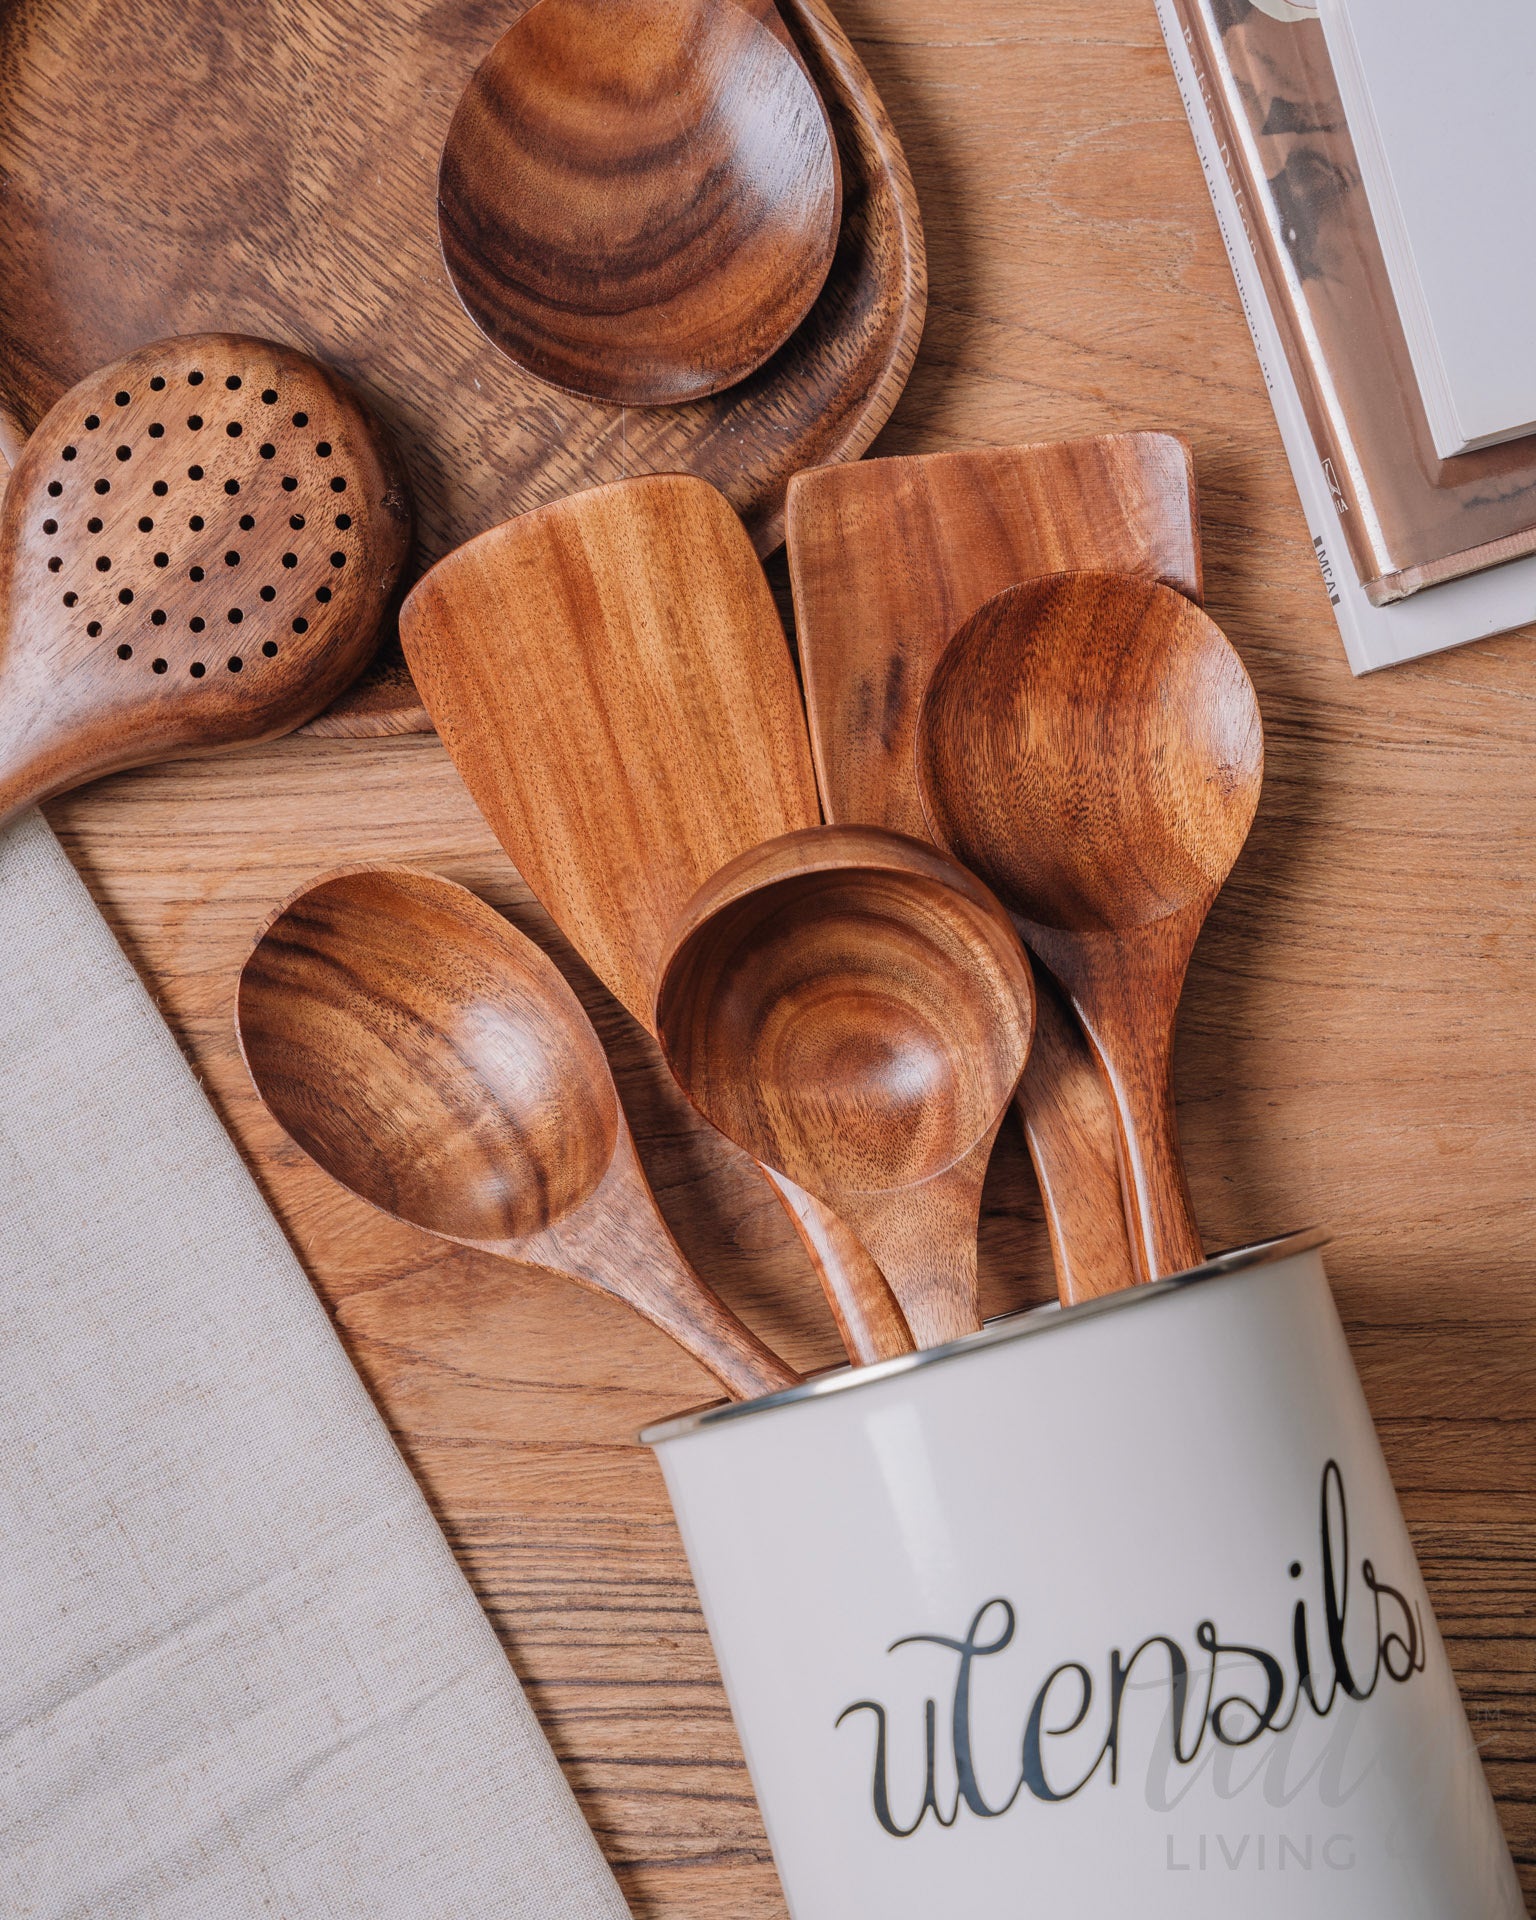 Teak Utensils: Enhancing Your Culinary Experience - Tilly Living